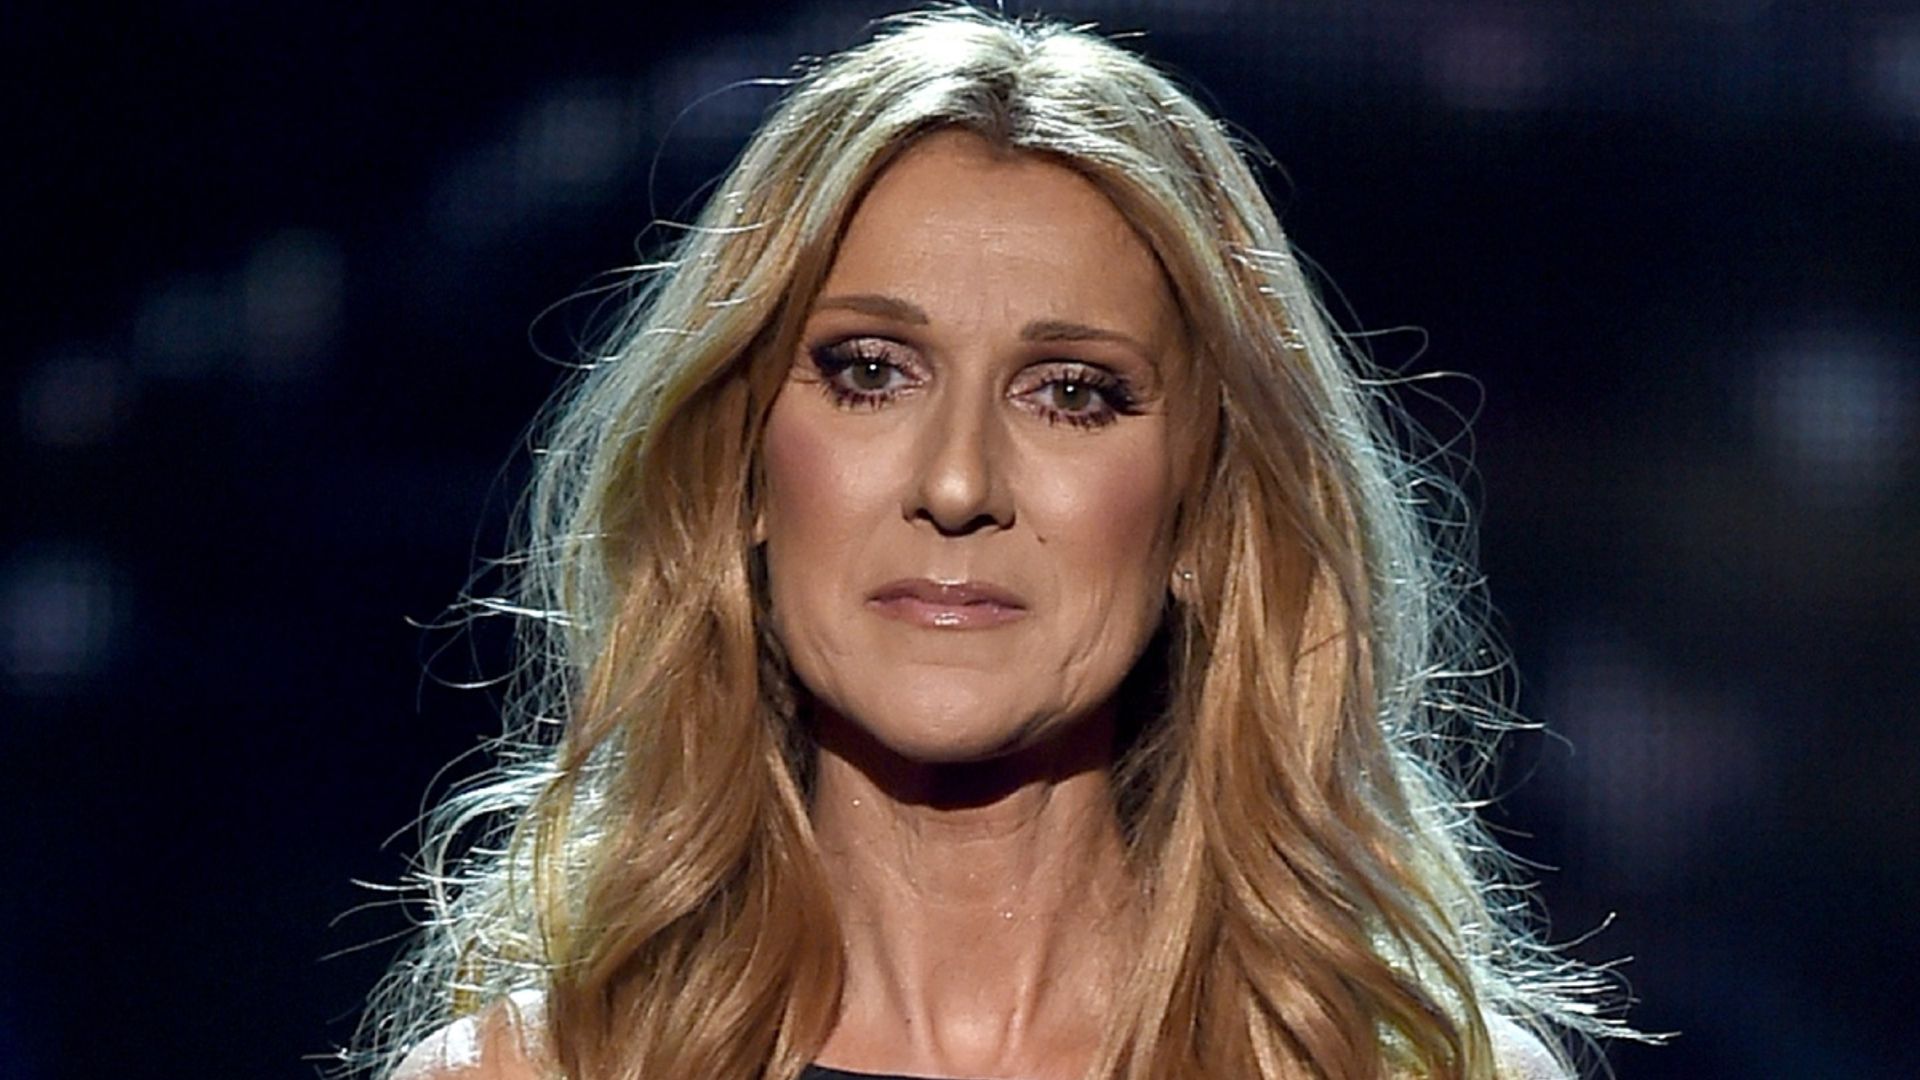 Celine Dion pays emotional tribute to Guy Lafleur with rare photograph of son Rene-Charles